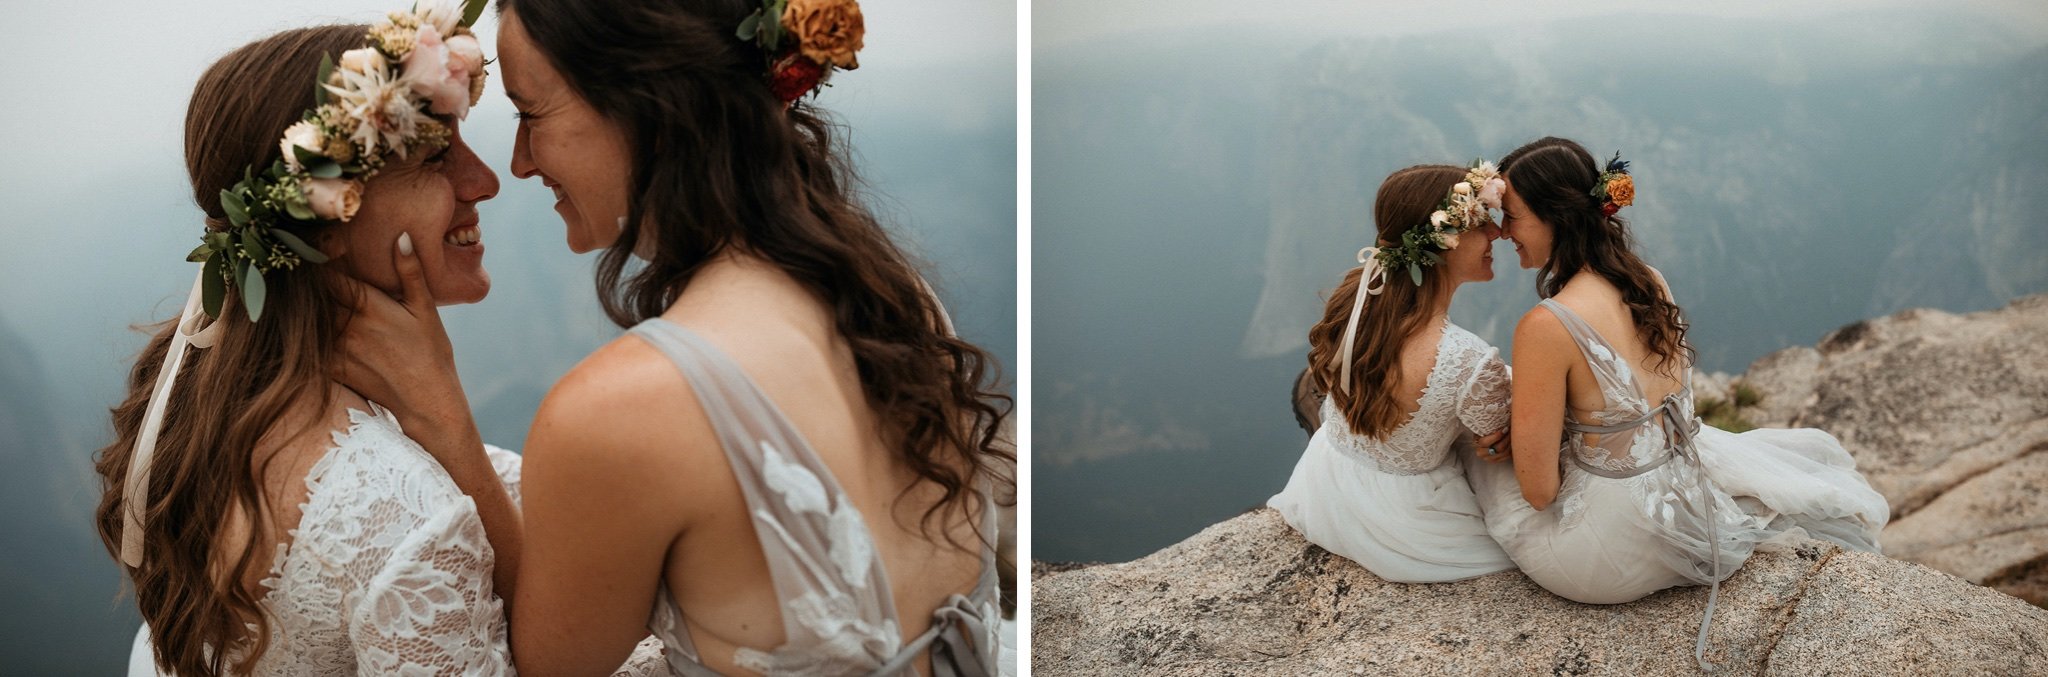 Yosemite National Park Elopement with Two Brides-Will Khoury51.jpg